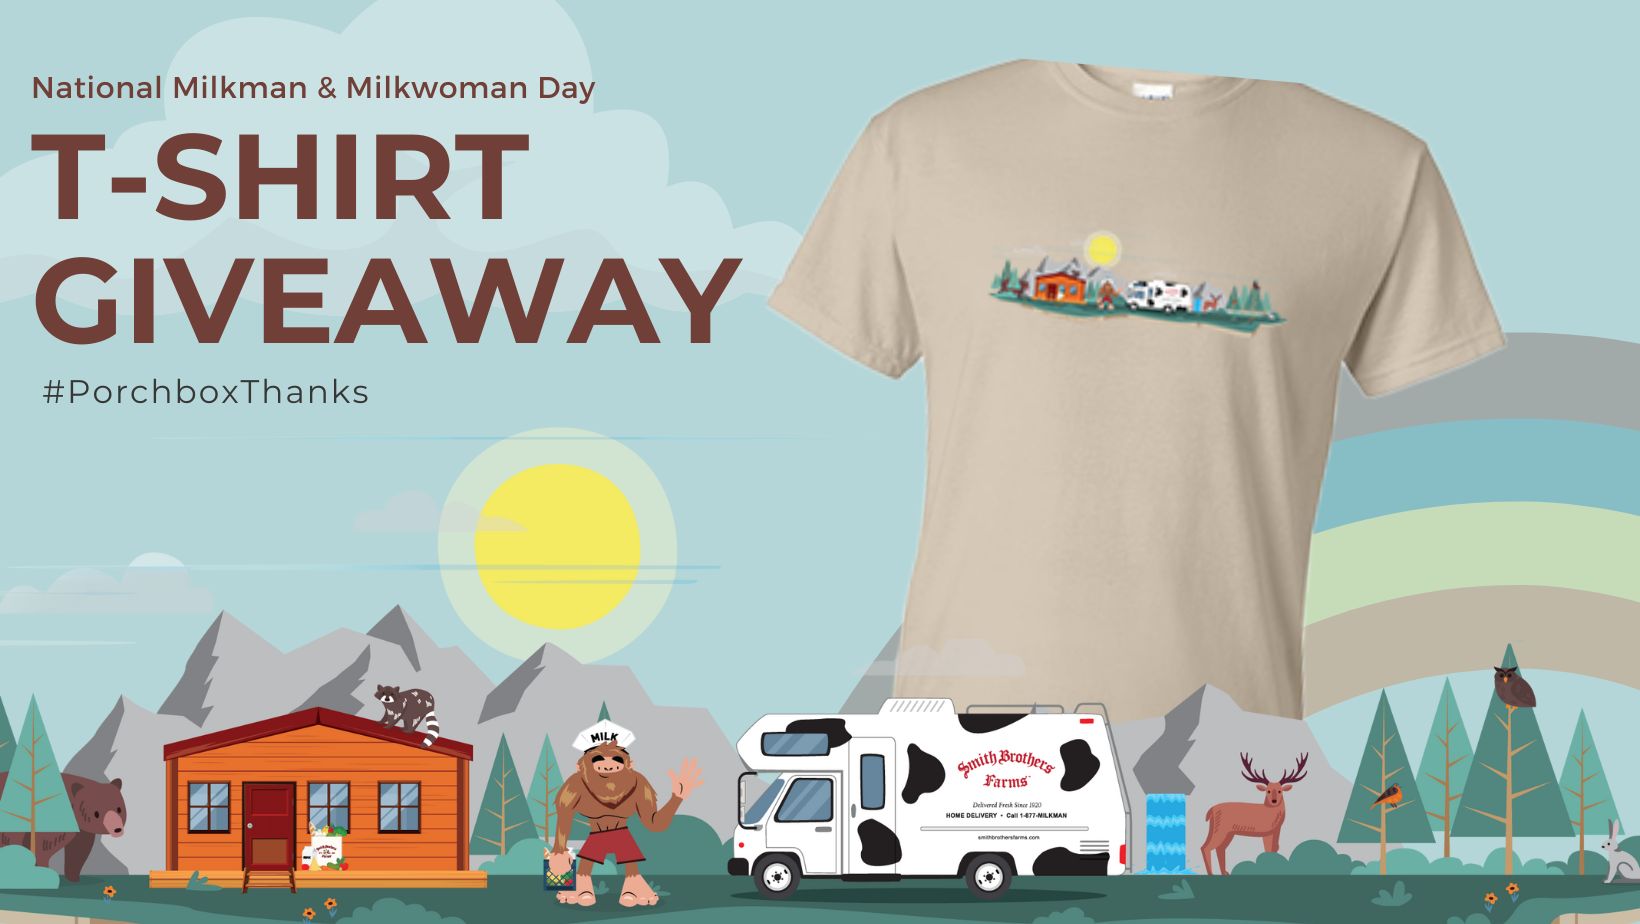 Smith Brothers Farms National Milkman & Milkwoman Day T-Shirt Giveaway width=